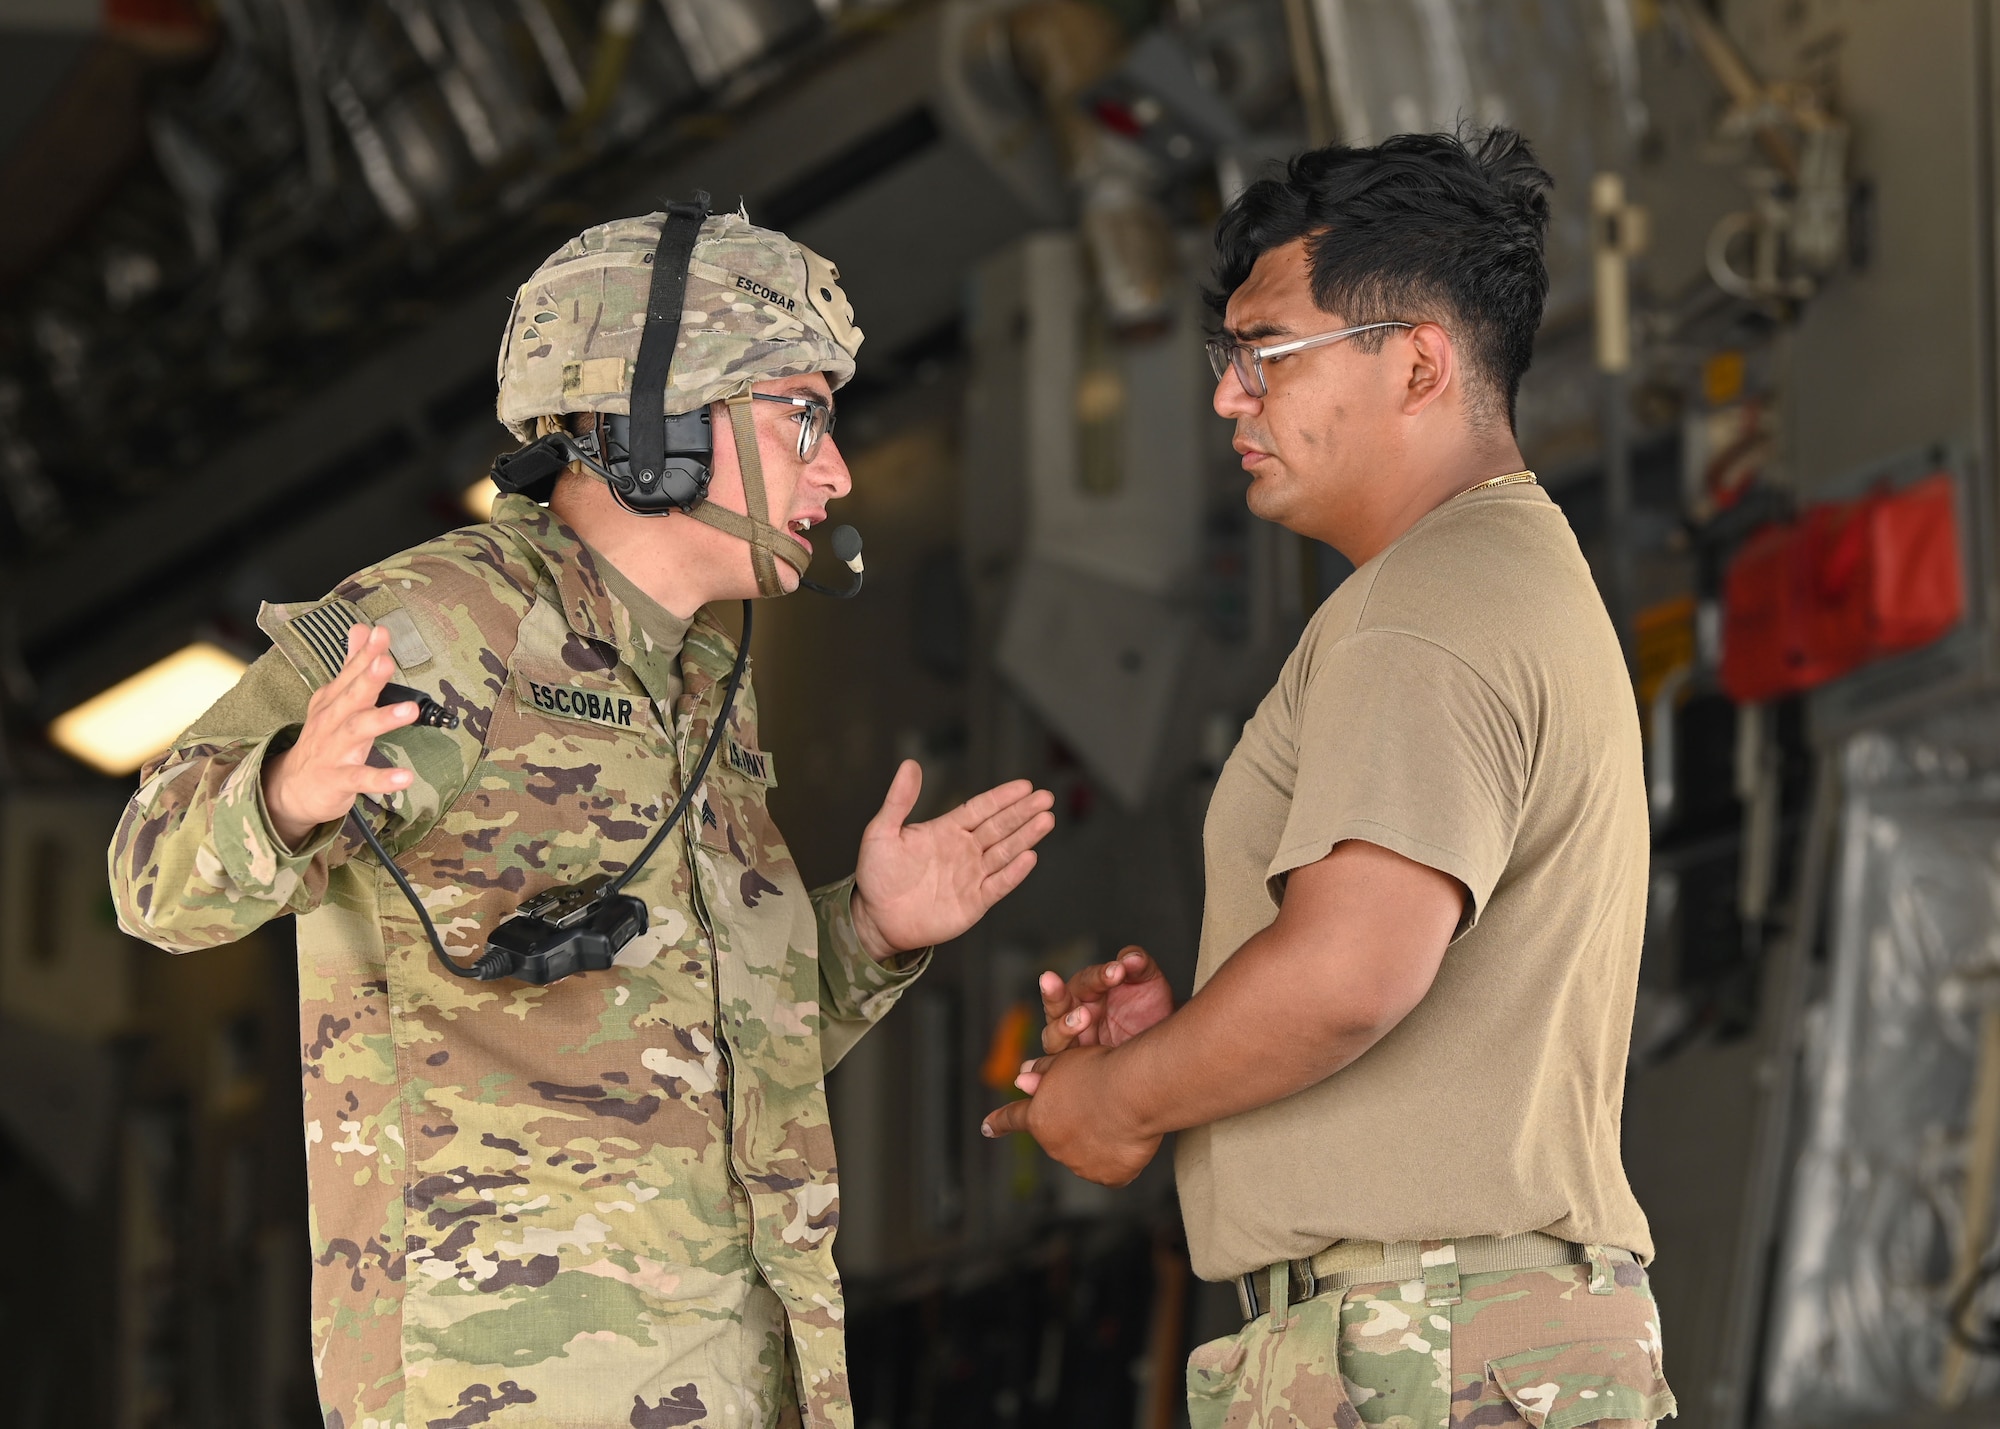 A U.S. Army Soldier debriefs another Soldier before uploading a High Mobility Artillery Rocket System onto U.S. Air Force C-17 Globemaster III assigned to Dover Air Force Base, Delaware, during Exercise GOLDEN BEE at Andersen Air Force Base, Guam, Sept. 26, 2022. Exercise GOLDEN BEE is a joint readiness exercise designed to provide training integration and rehearse strategic and operational objectives in support of Agile Combat Employment initiatives in the Indo-Pacific area of responsibility. (U.S. Air Force photo by Staff Sgt. Aubree Owens)